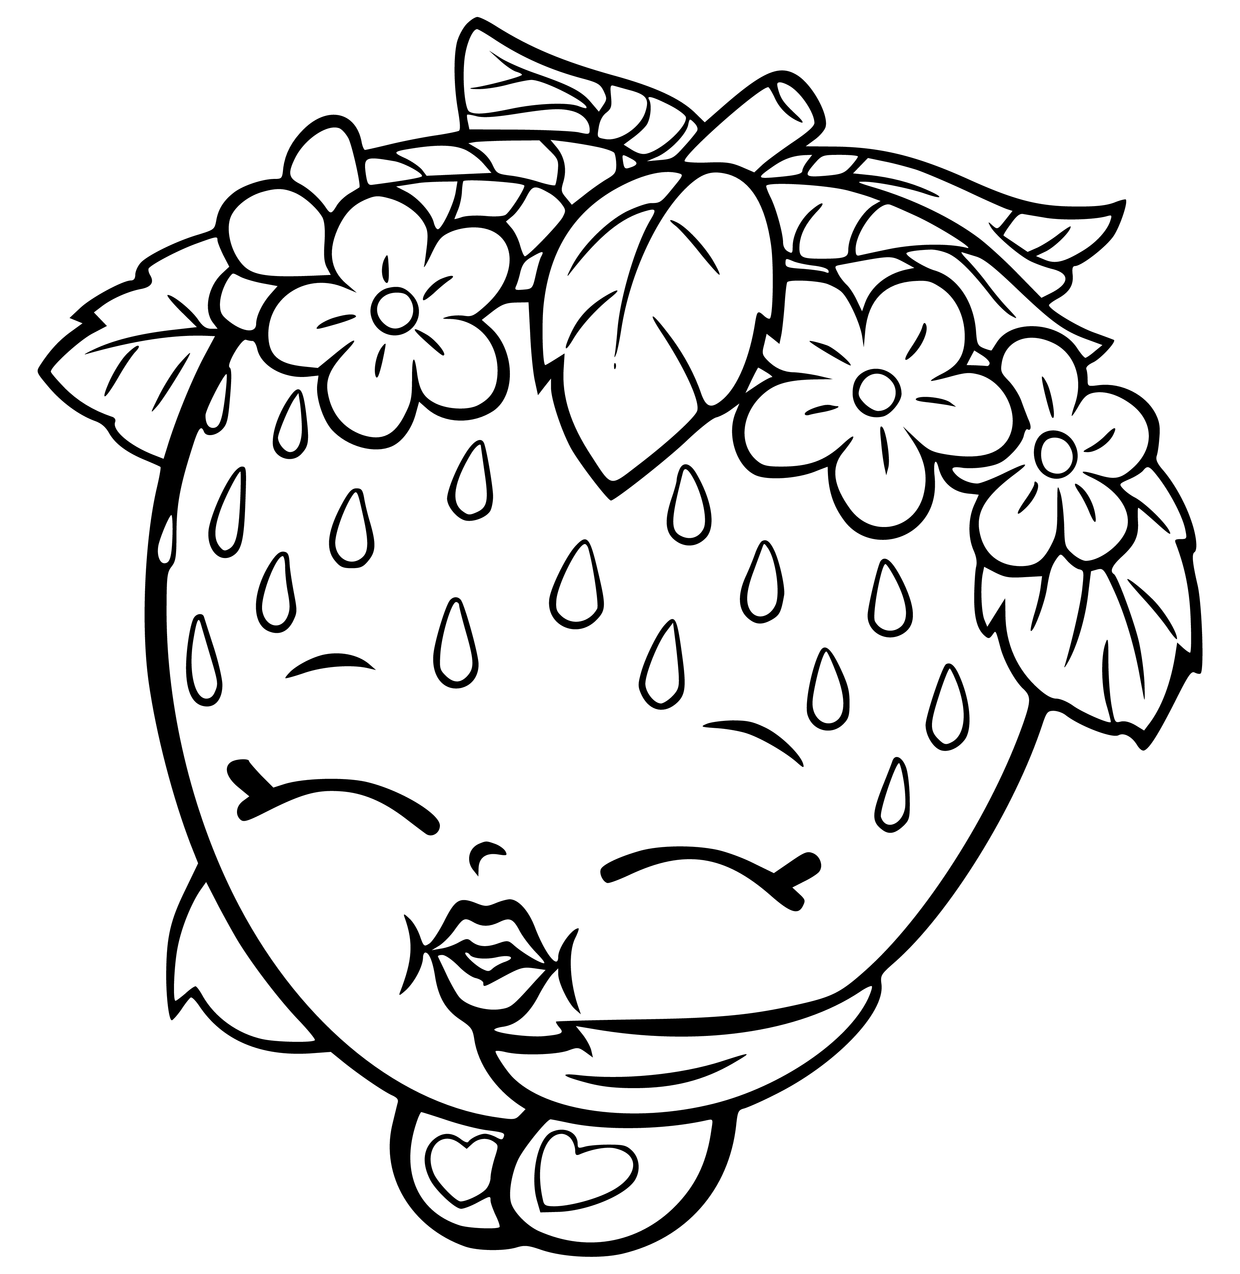 strawberry-coloring-pages-best-coloring-pages-for-kids